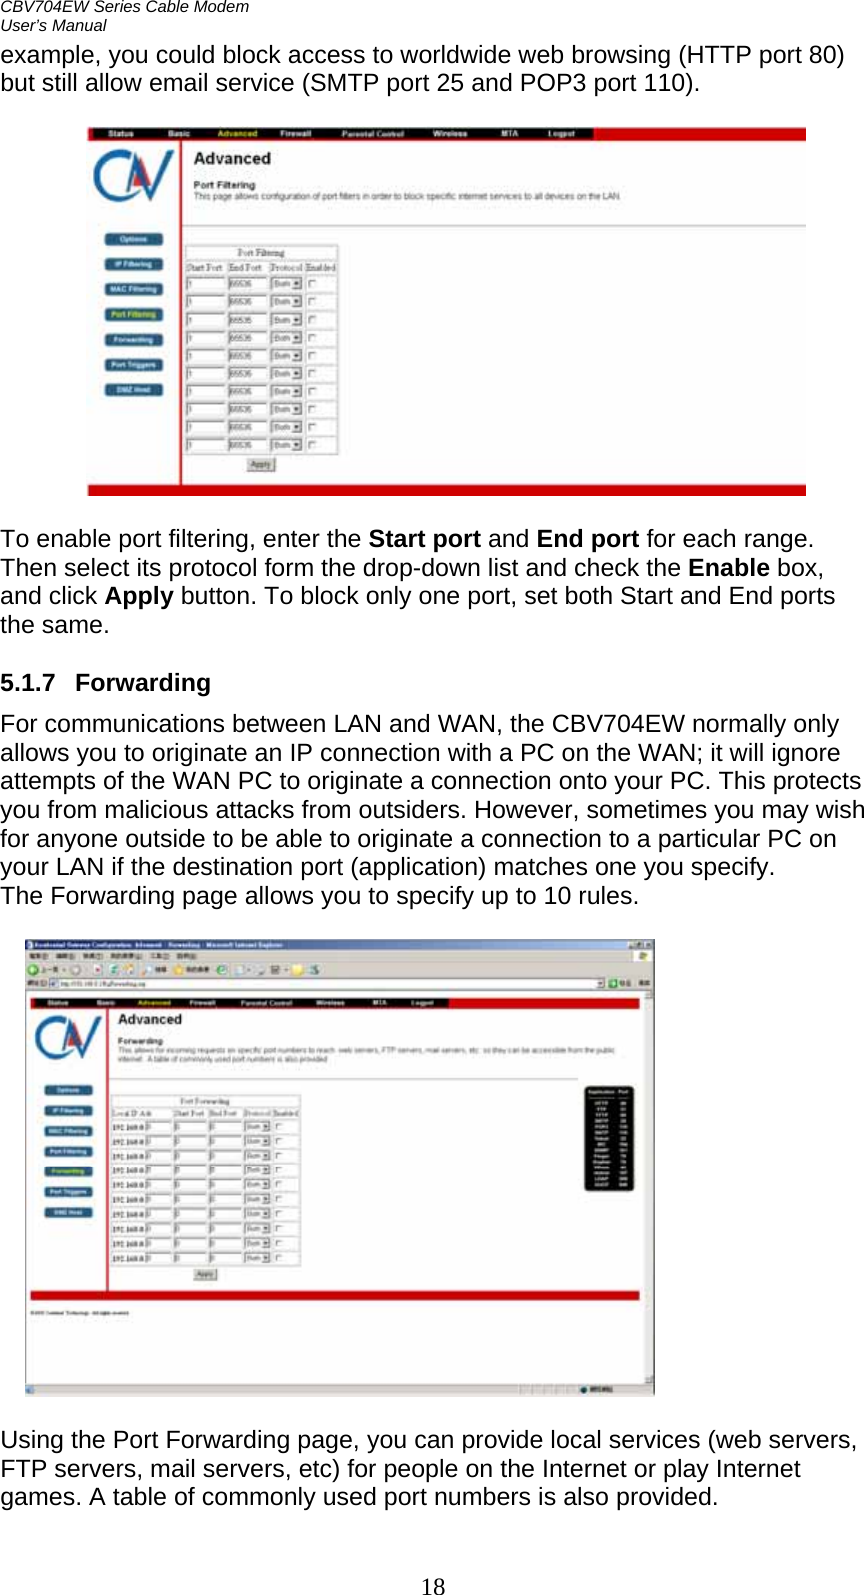 CBV704EW Series Cable Modem  User’s Manual 18 example, you could block access to worldwide web browsing (HTTP port 80) but still allow email service (SMTP port 25 and POP3 port 110).    To enable port filtering, enter the Start port and End port for each range. Then select its protocol form the drop-down list and check the Enable box, and click Apply button. To block only one port, set both Start and End ports the same.  5.1.7 Forwarding For communications between LAN and WAN, the CBV704EW normally only allows you to originate an IP connection with a PC on the WAN; it will ignore attempts of the WAN PC to originate a connection onto your PC. This protects you from malicious attacks from outsiders. However, sometimes you may wish for anyone outside to be able to originate a connection to a particular PC on your LAN if the destination port (application) matches one you specify. The Forwarding page allows you to specify up to 10 rules.    Using the Port Forwarding page, you can provide local services (web servers, FTP servers, mail servers, etc) for people on the Internet or play Internet games. A table of commonly used port numbers is also provided.  